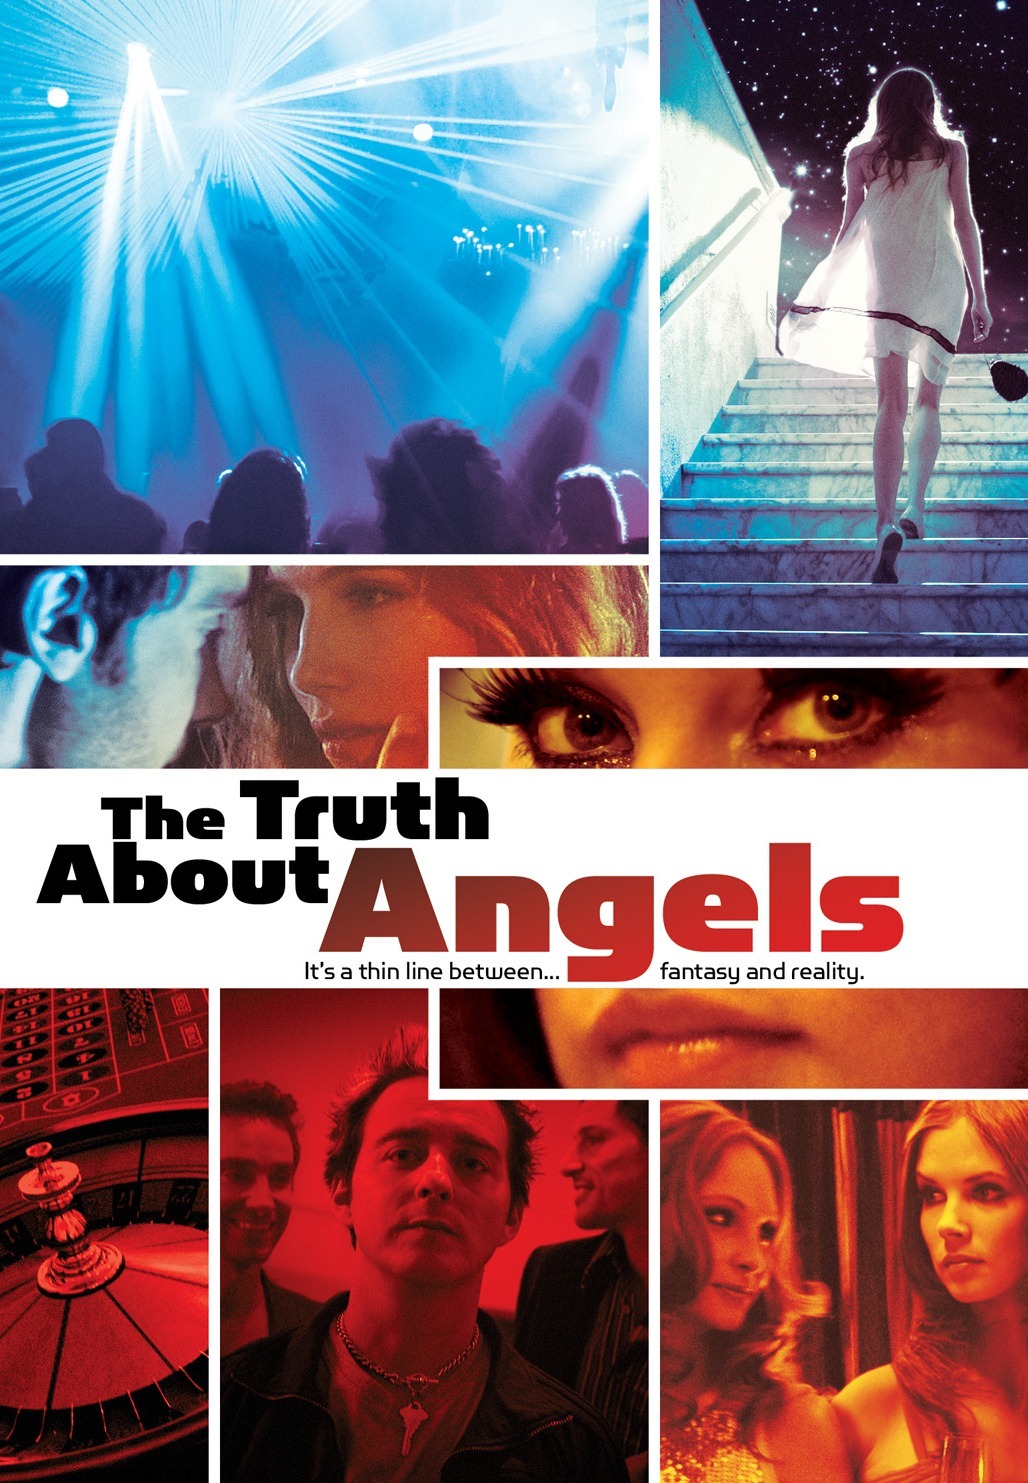 The Truth About Angels movie nude scenes